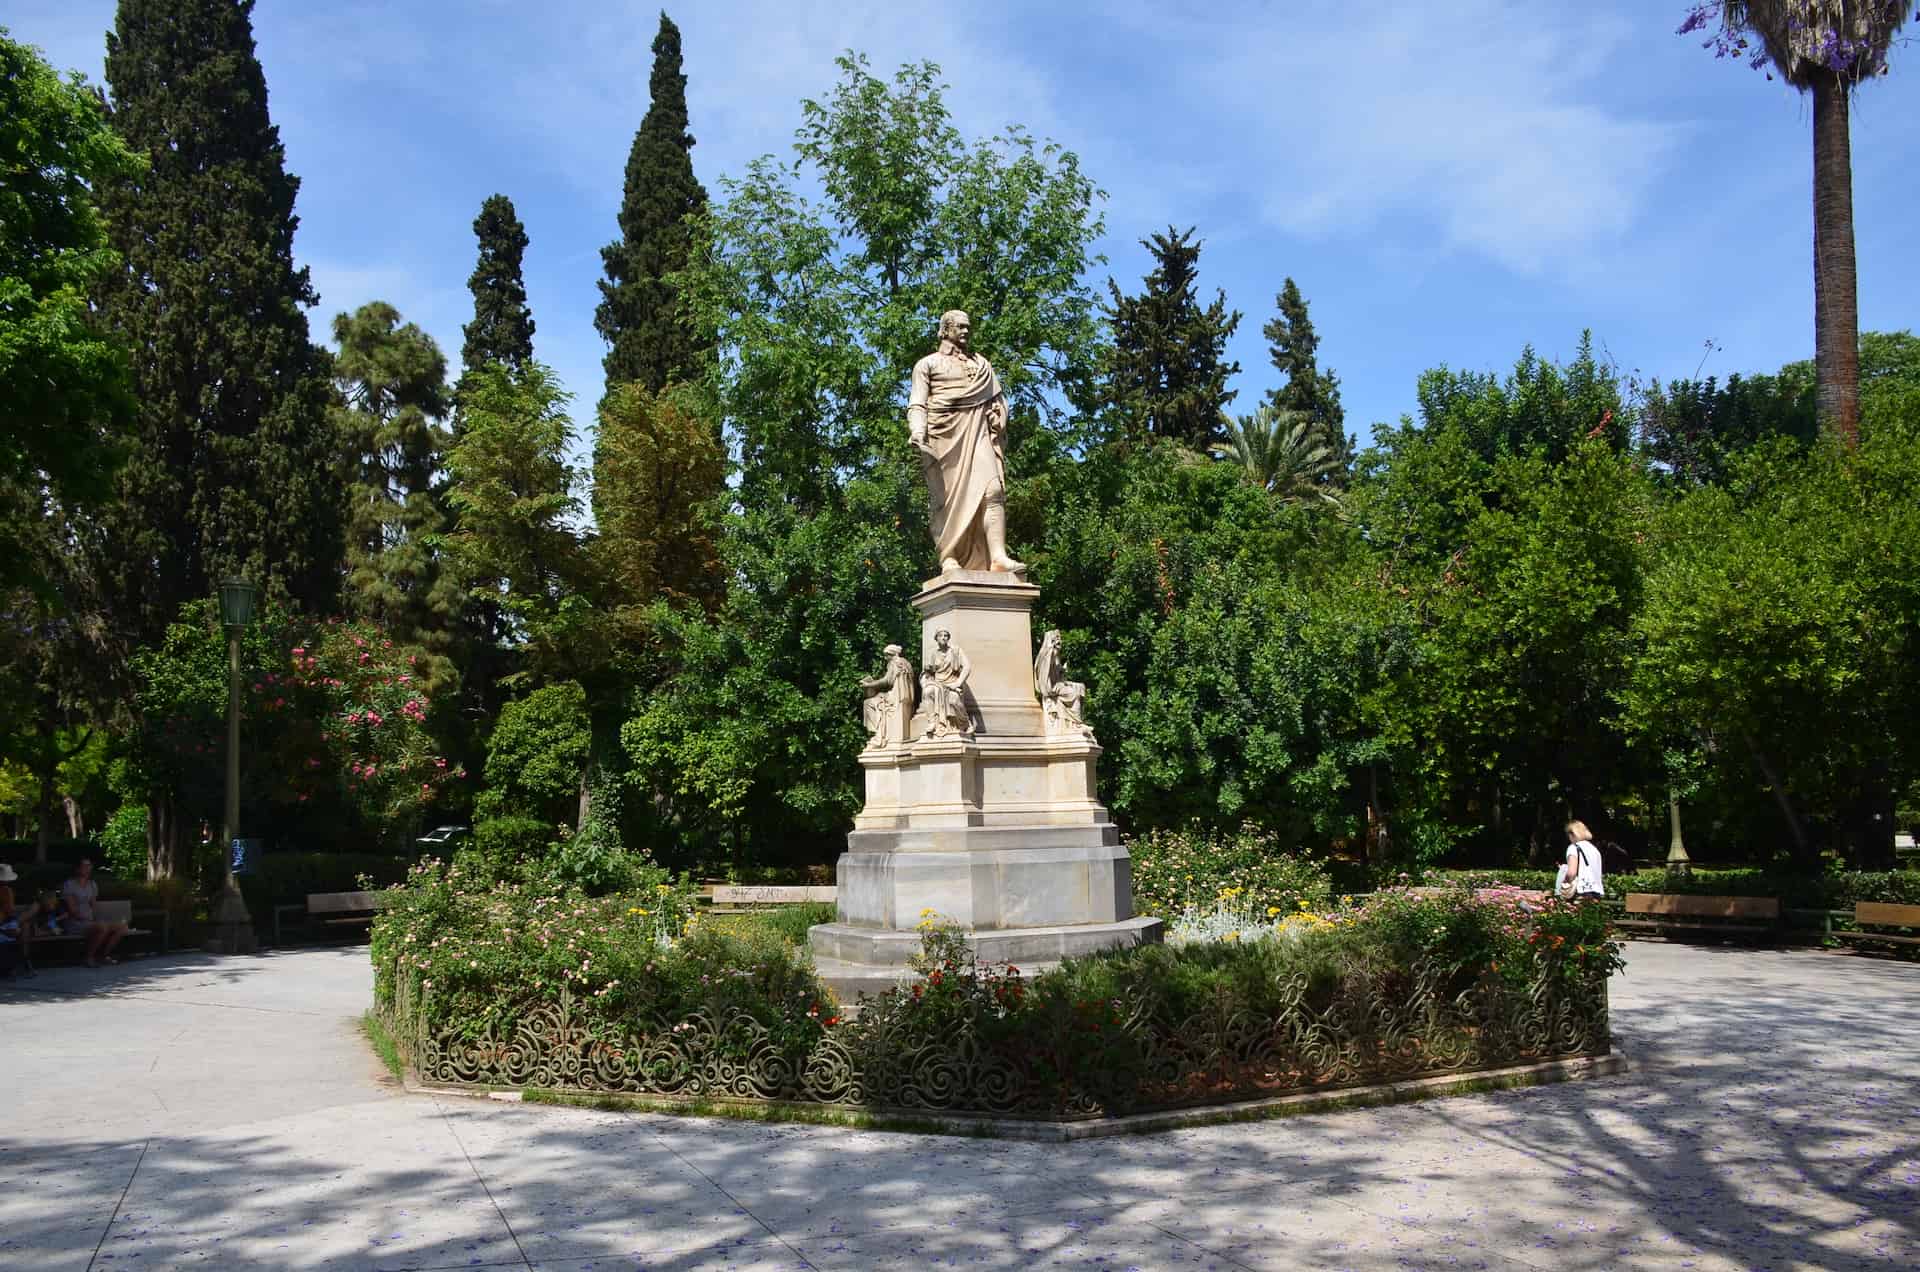 Statue of Ioannis Varvakis at the Zappeion Gardens